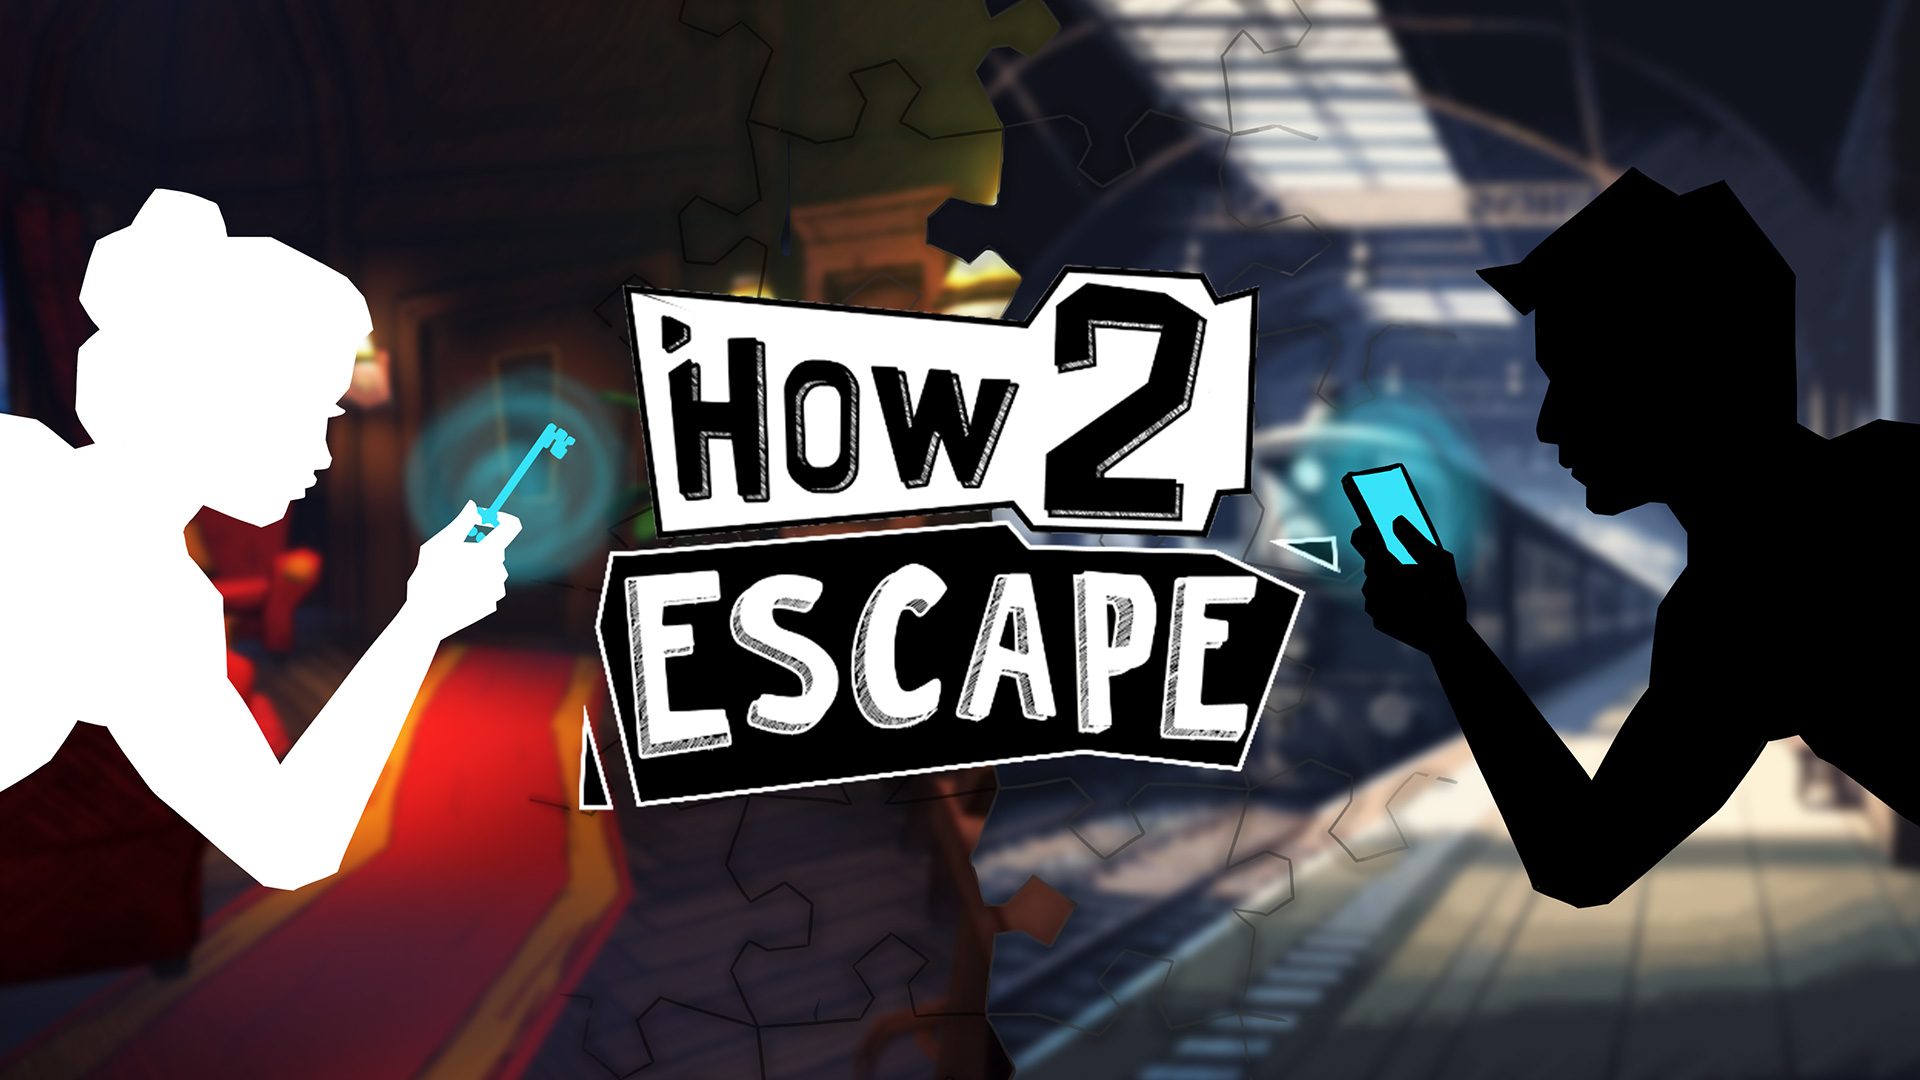 How 2 Escape will make players cooperate with a new way to play